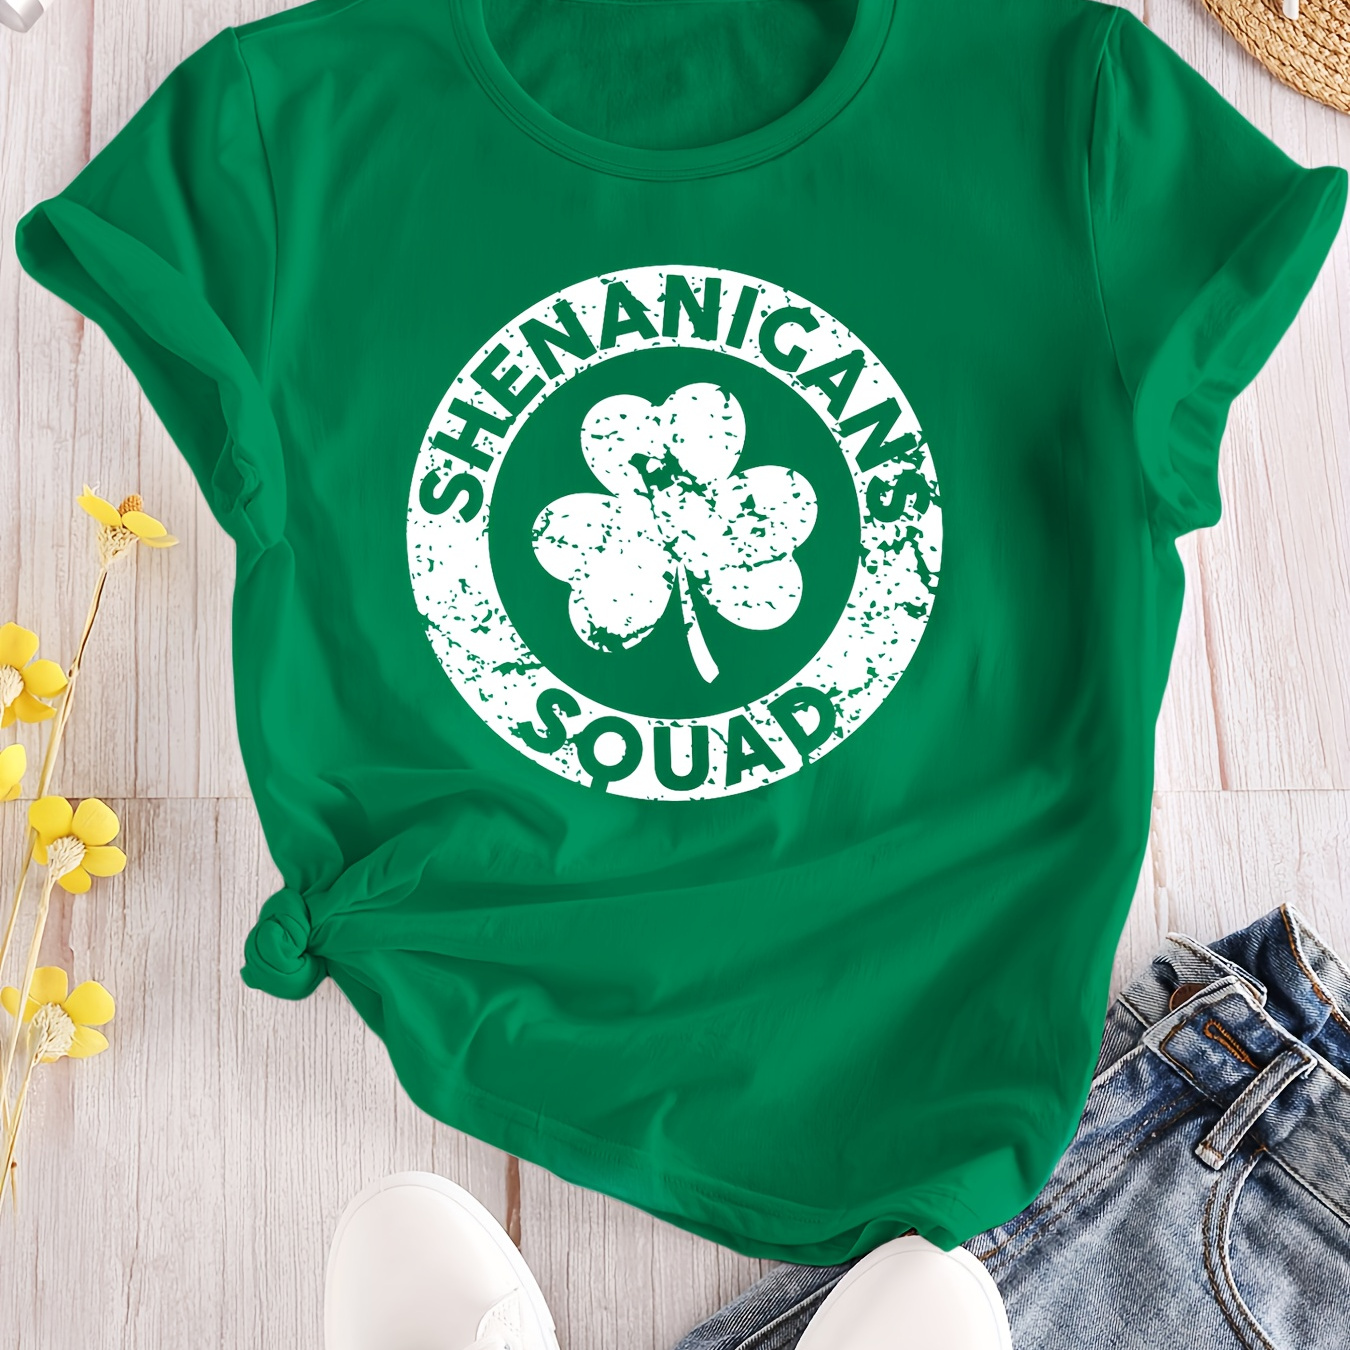 

St. Patrick's Day Lucky Print Casual Sports T-shirt, Short Sleeve Round Neck Workout Tops, Women's Activewear